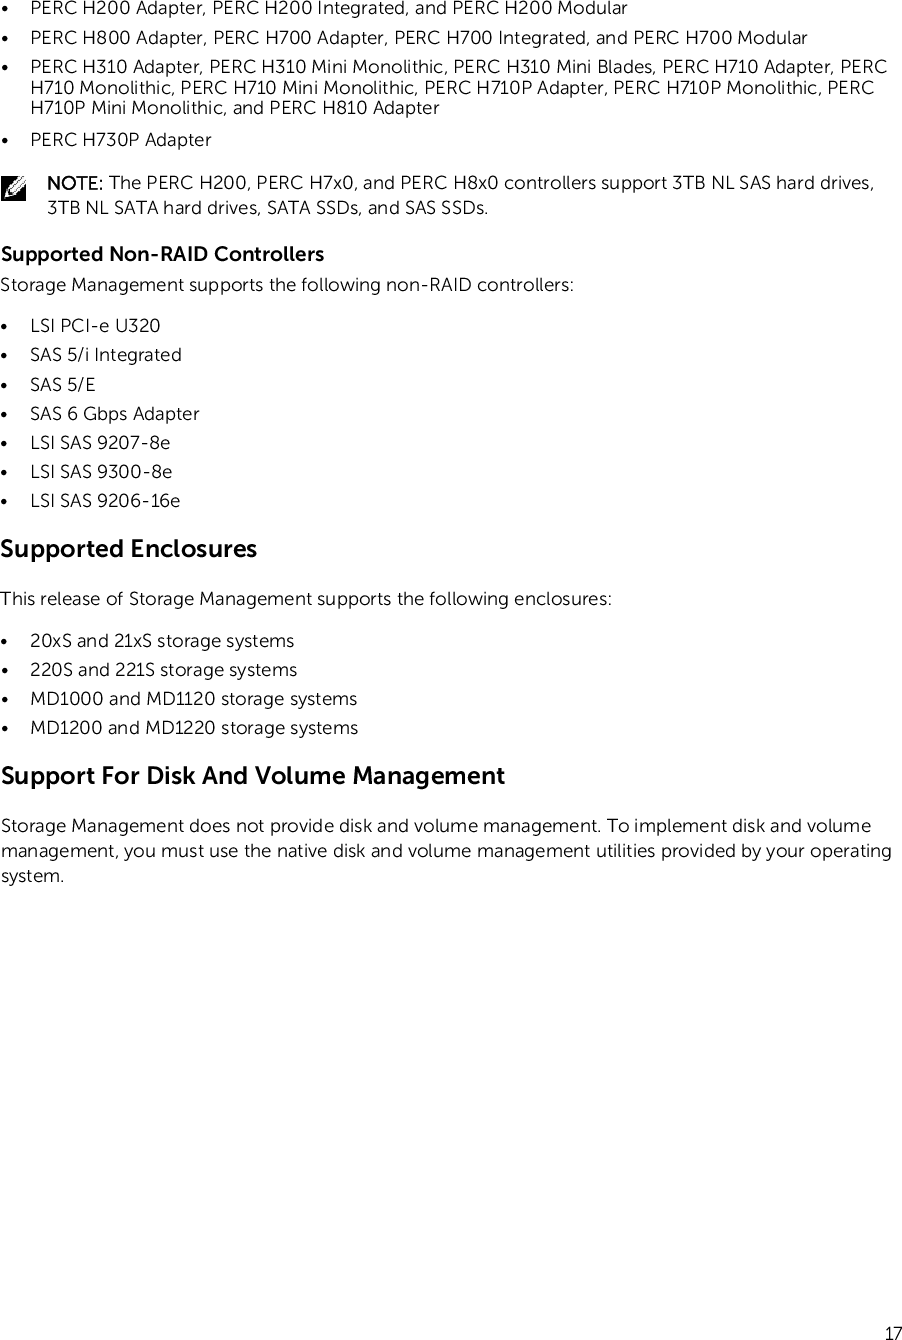 dell perc h200 encryption support